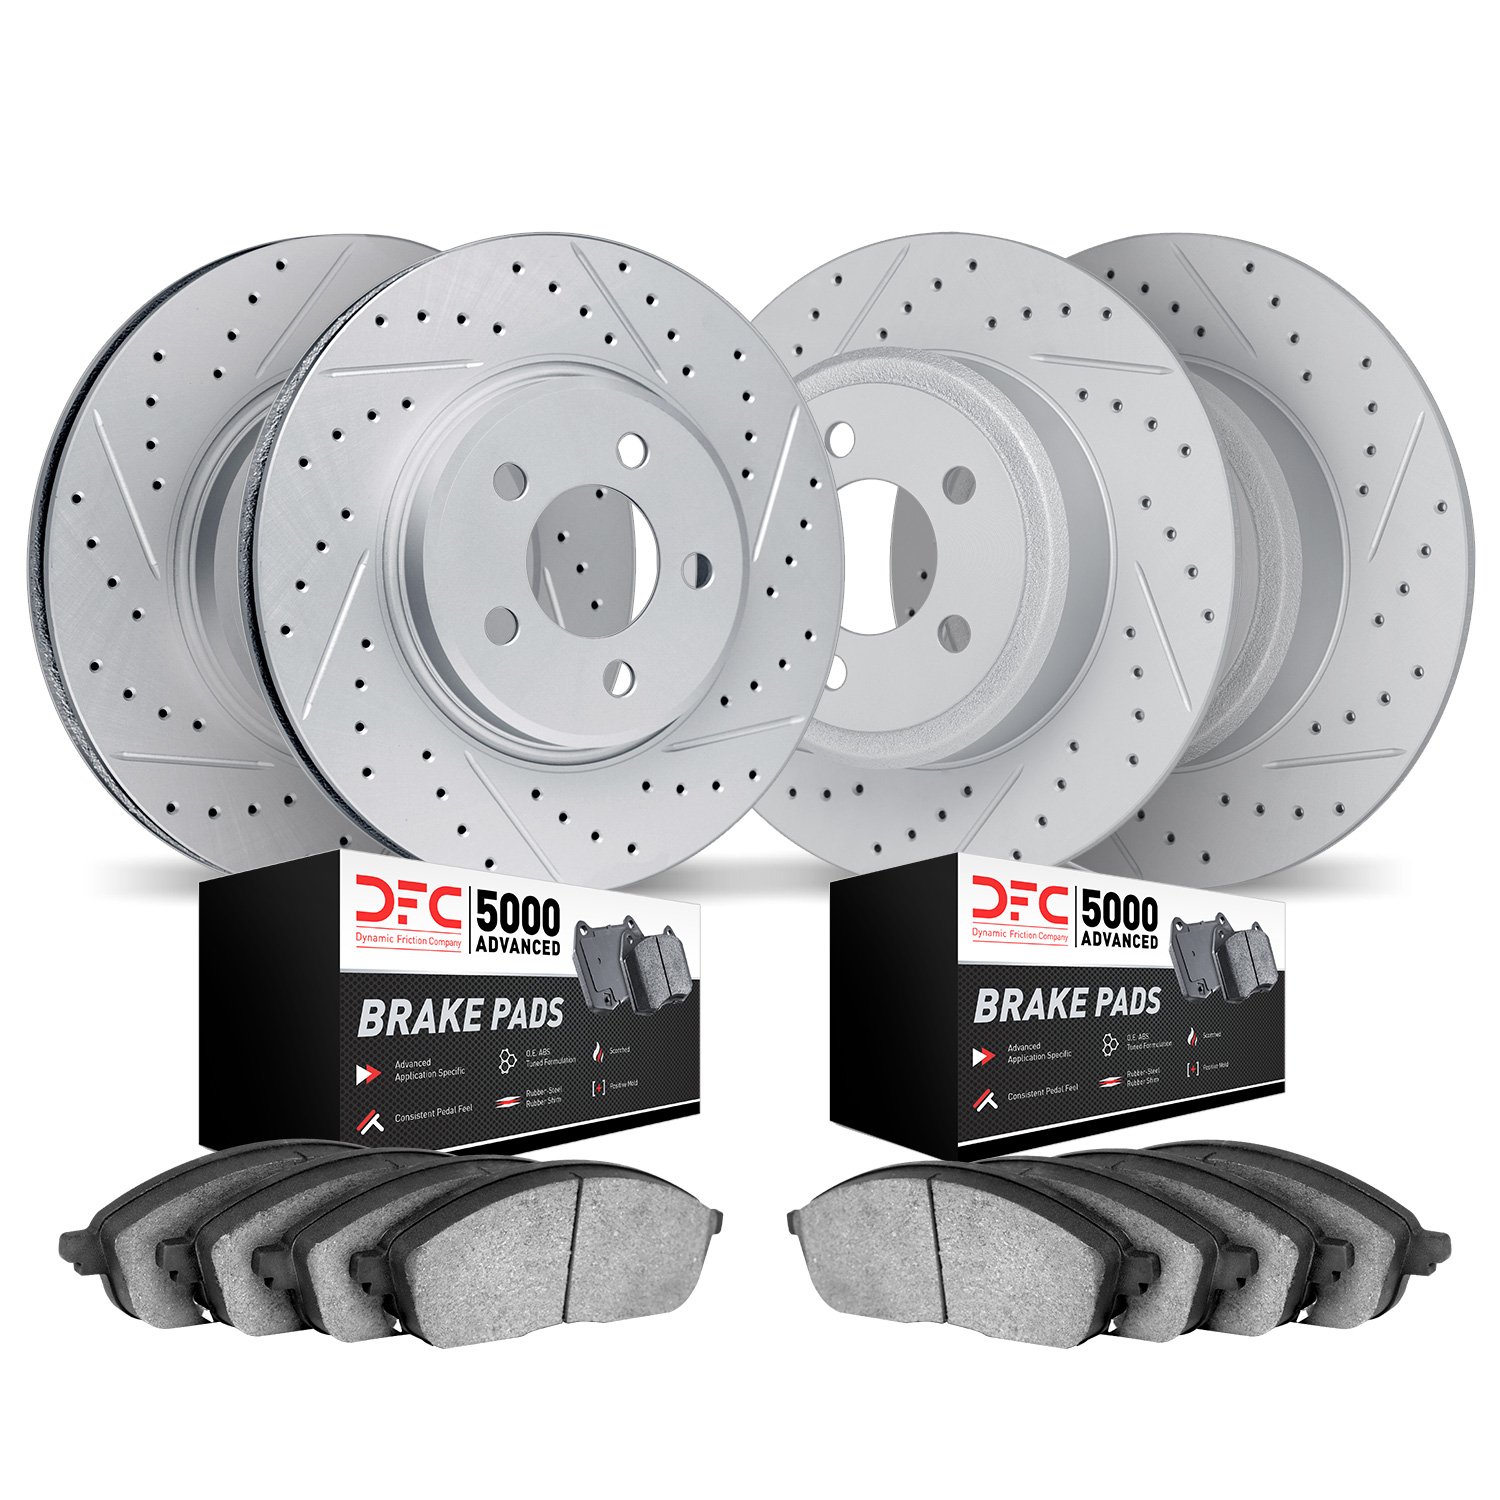 2504-45035 Geoperformance Drilled/Slotted Rotors w/5000 Advanced Brake Pads Kit, 2019-2020 GM, Position: Front and Rear